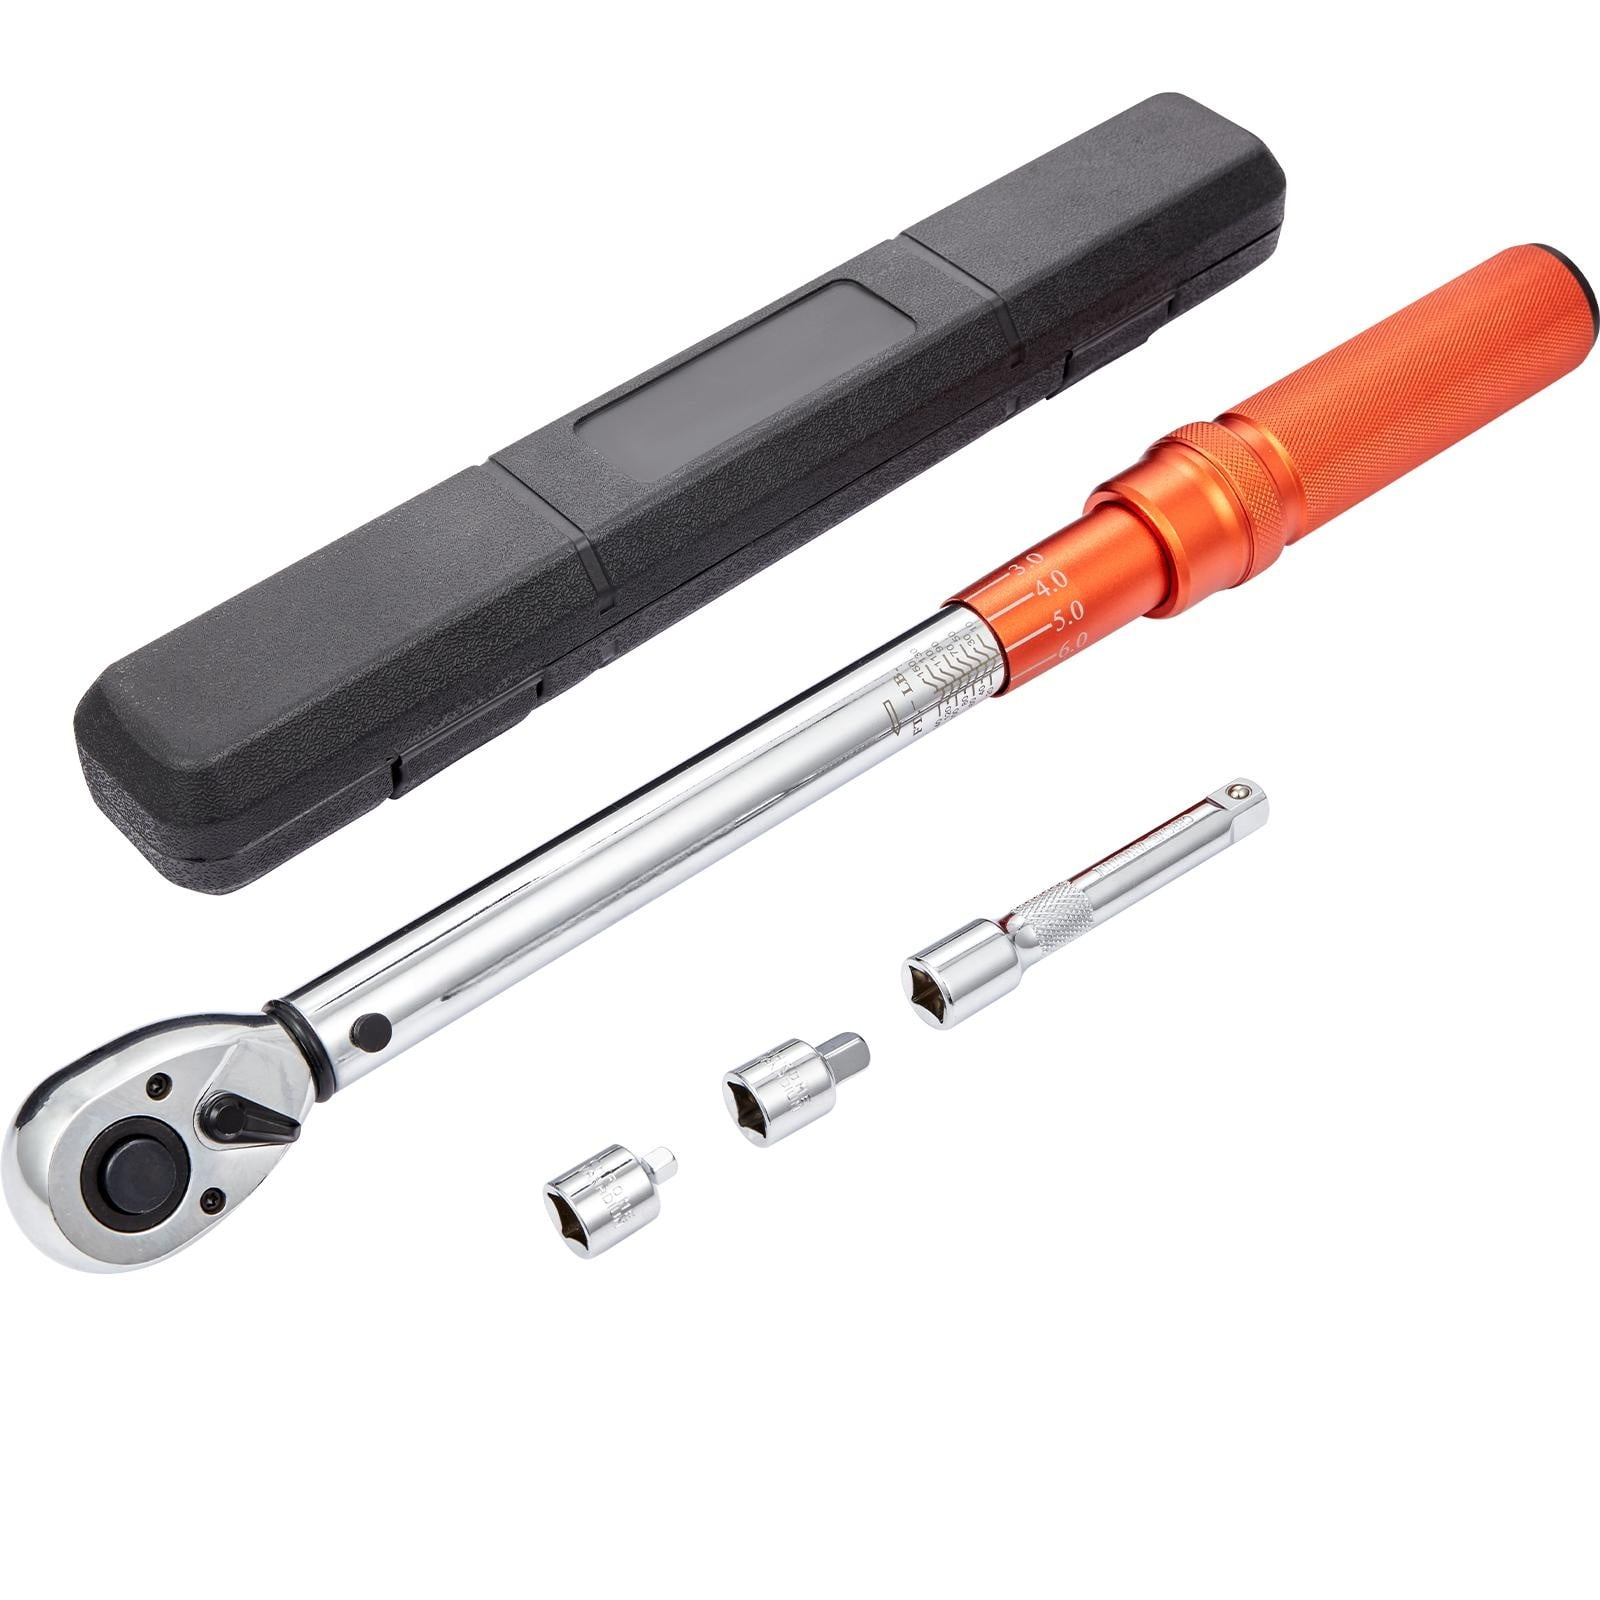 BENTISM Torque Wrench, 1/2 Drive Click Torque Wrench  20-250ft.lb/34-340n.m, Dual-Direction Adjustable Torque Wrench Set,  Mechanical Dual Range Scales Torque Wrench Kit with Adapters Extension Rod  